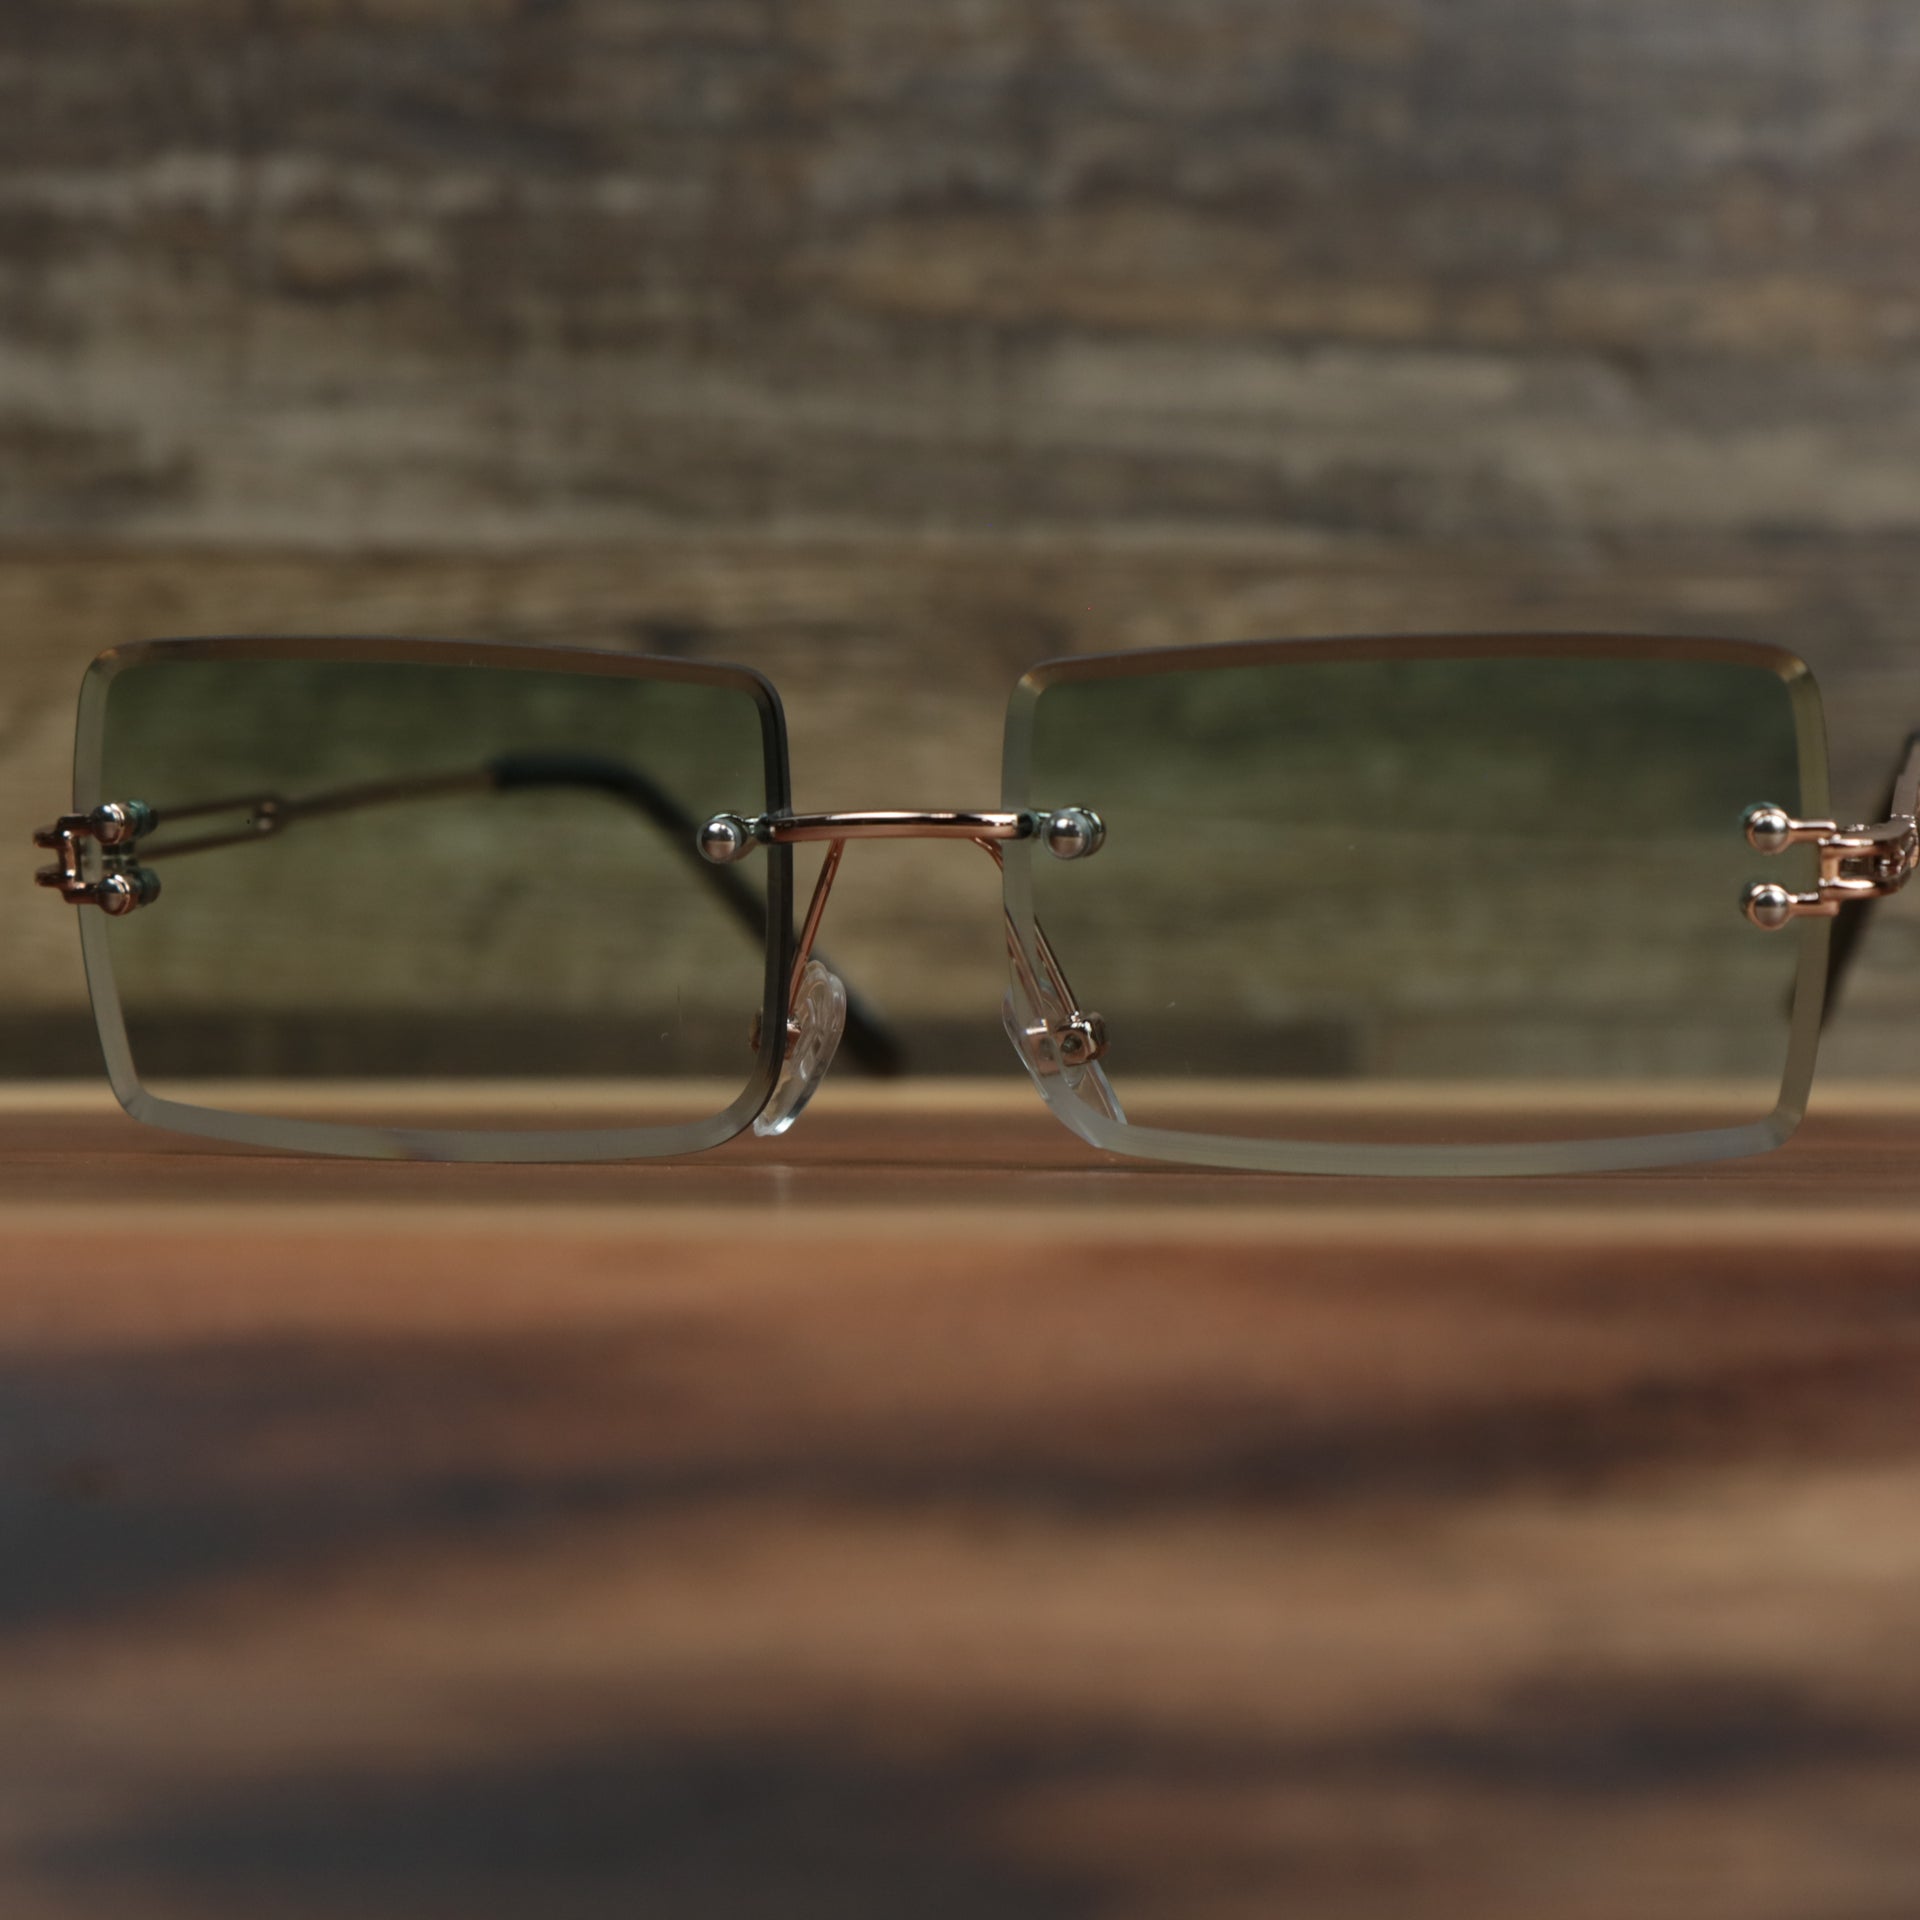 The Rectangle Frame Green Lens Sunglasses with Gold Frame